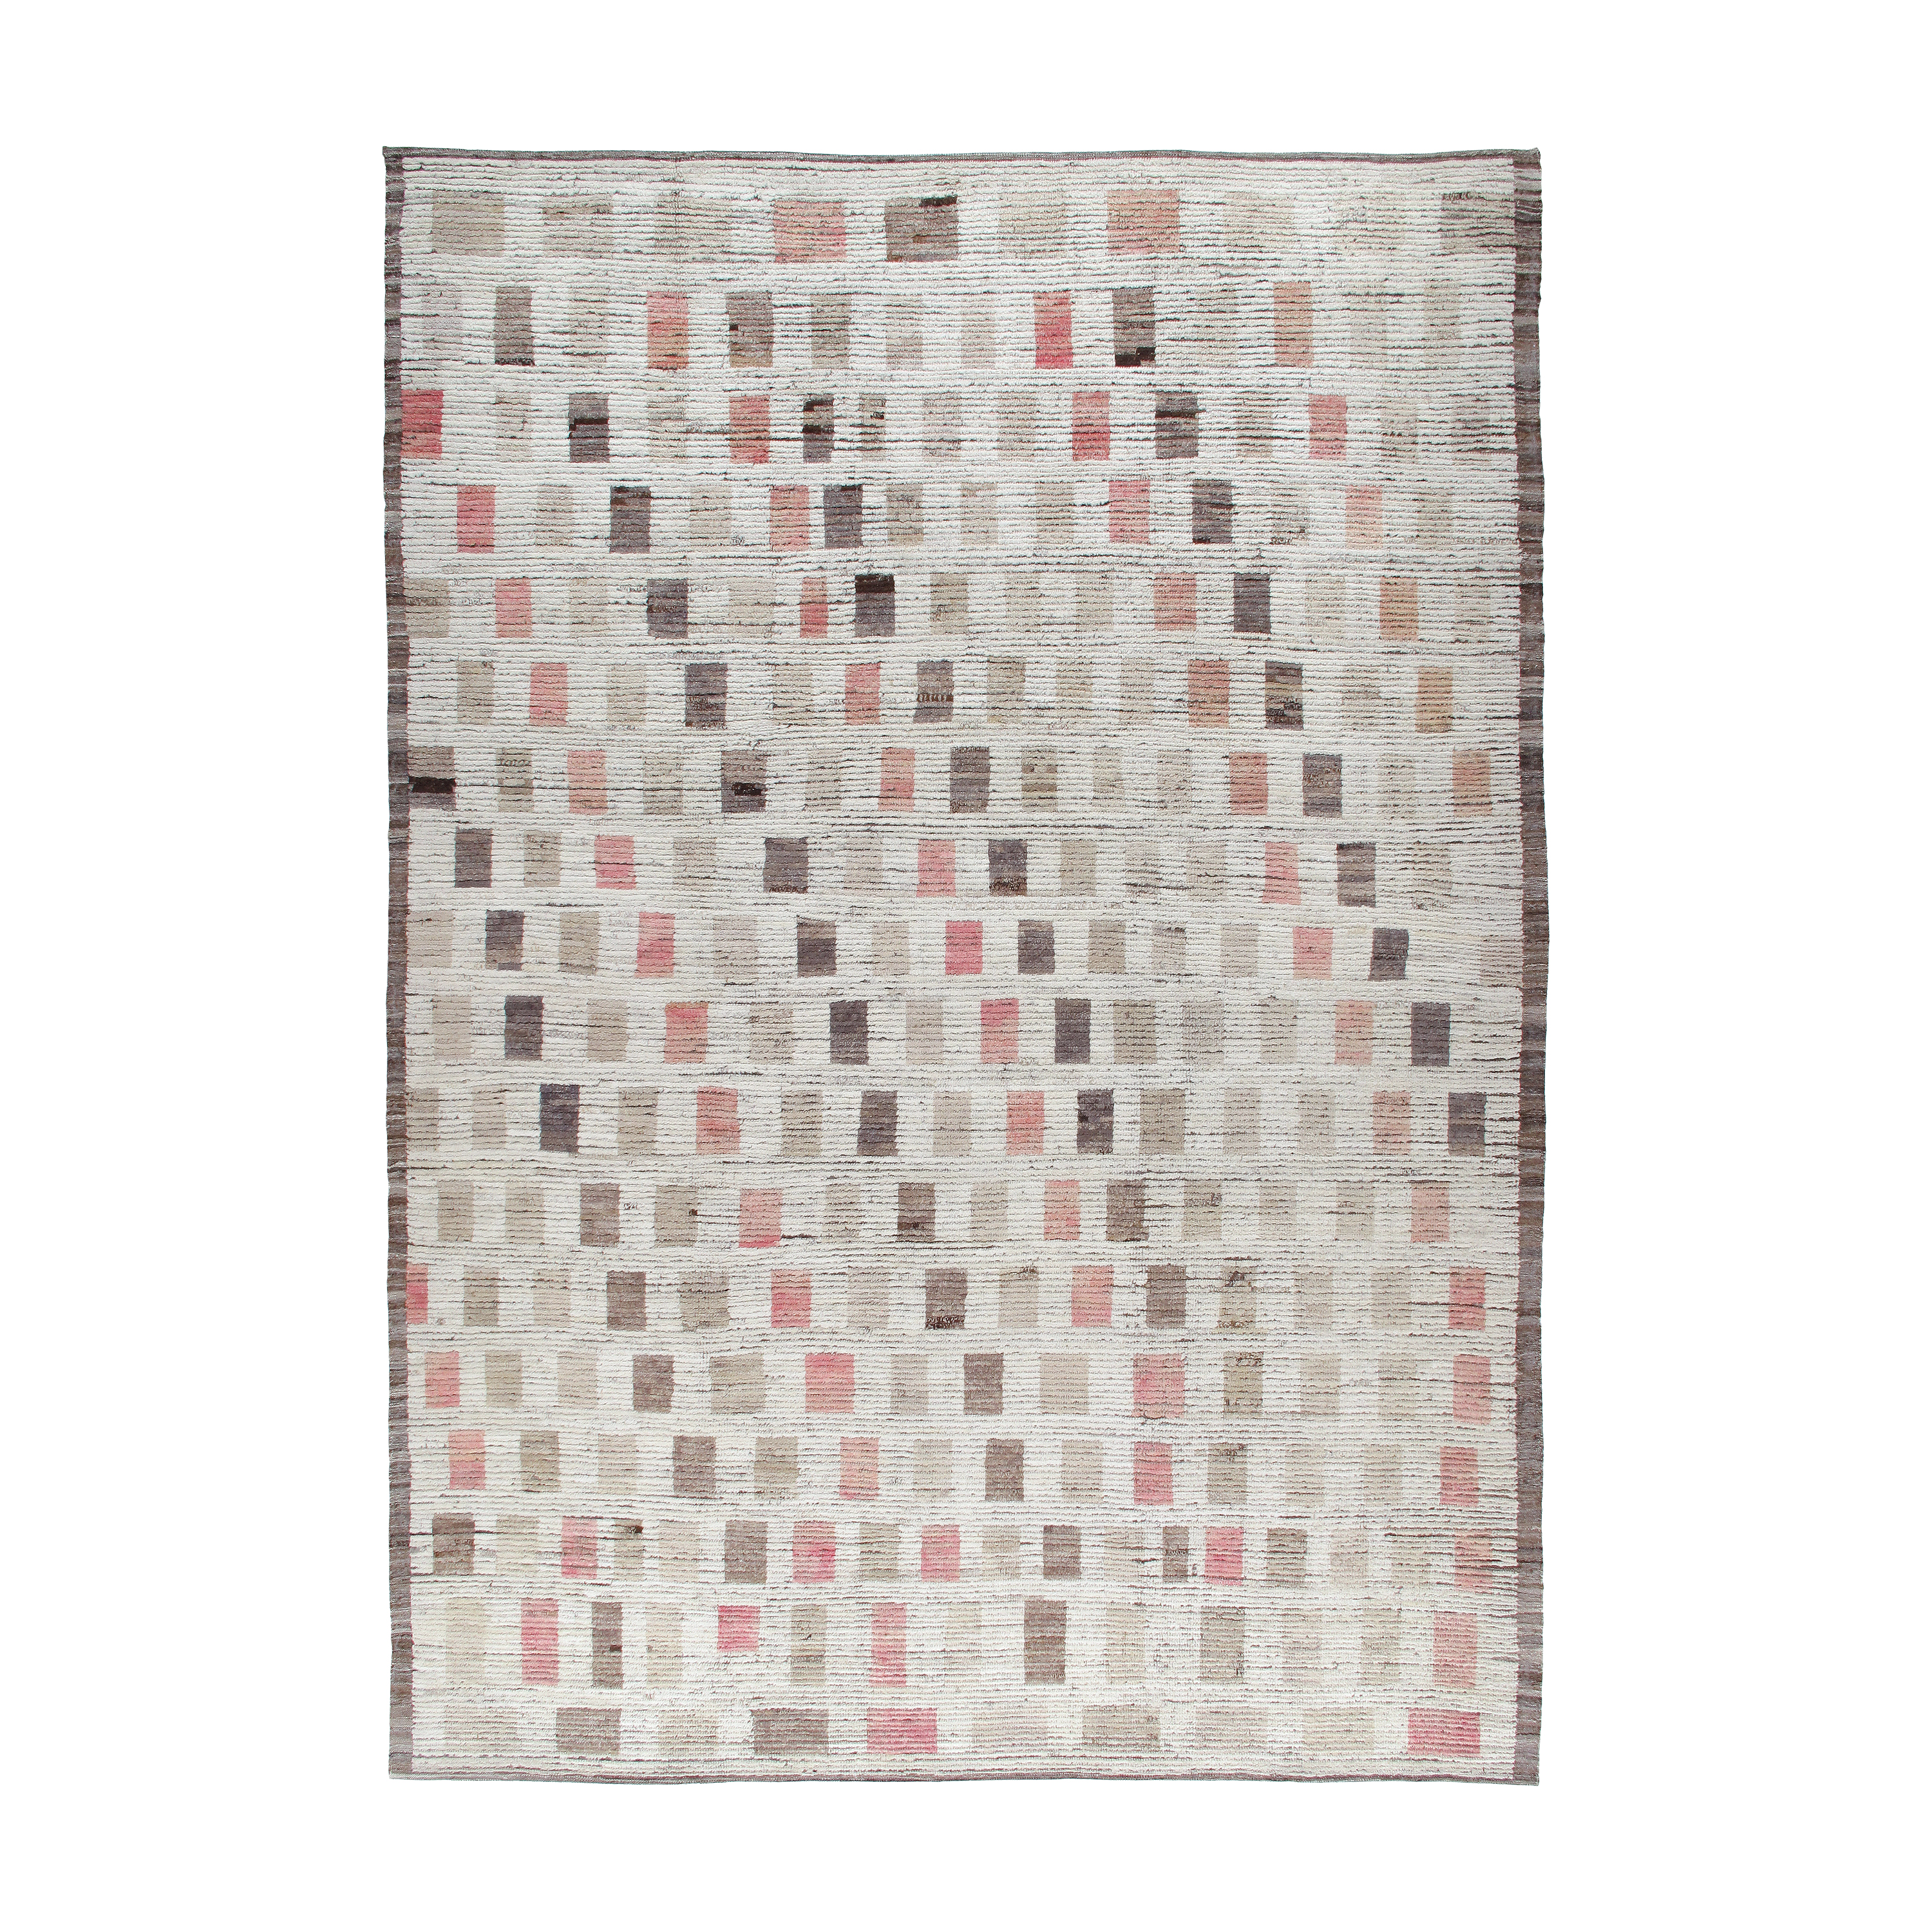 This Block rug is hand-knotted and made of 100% wool.